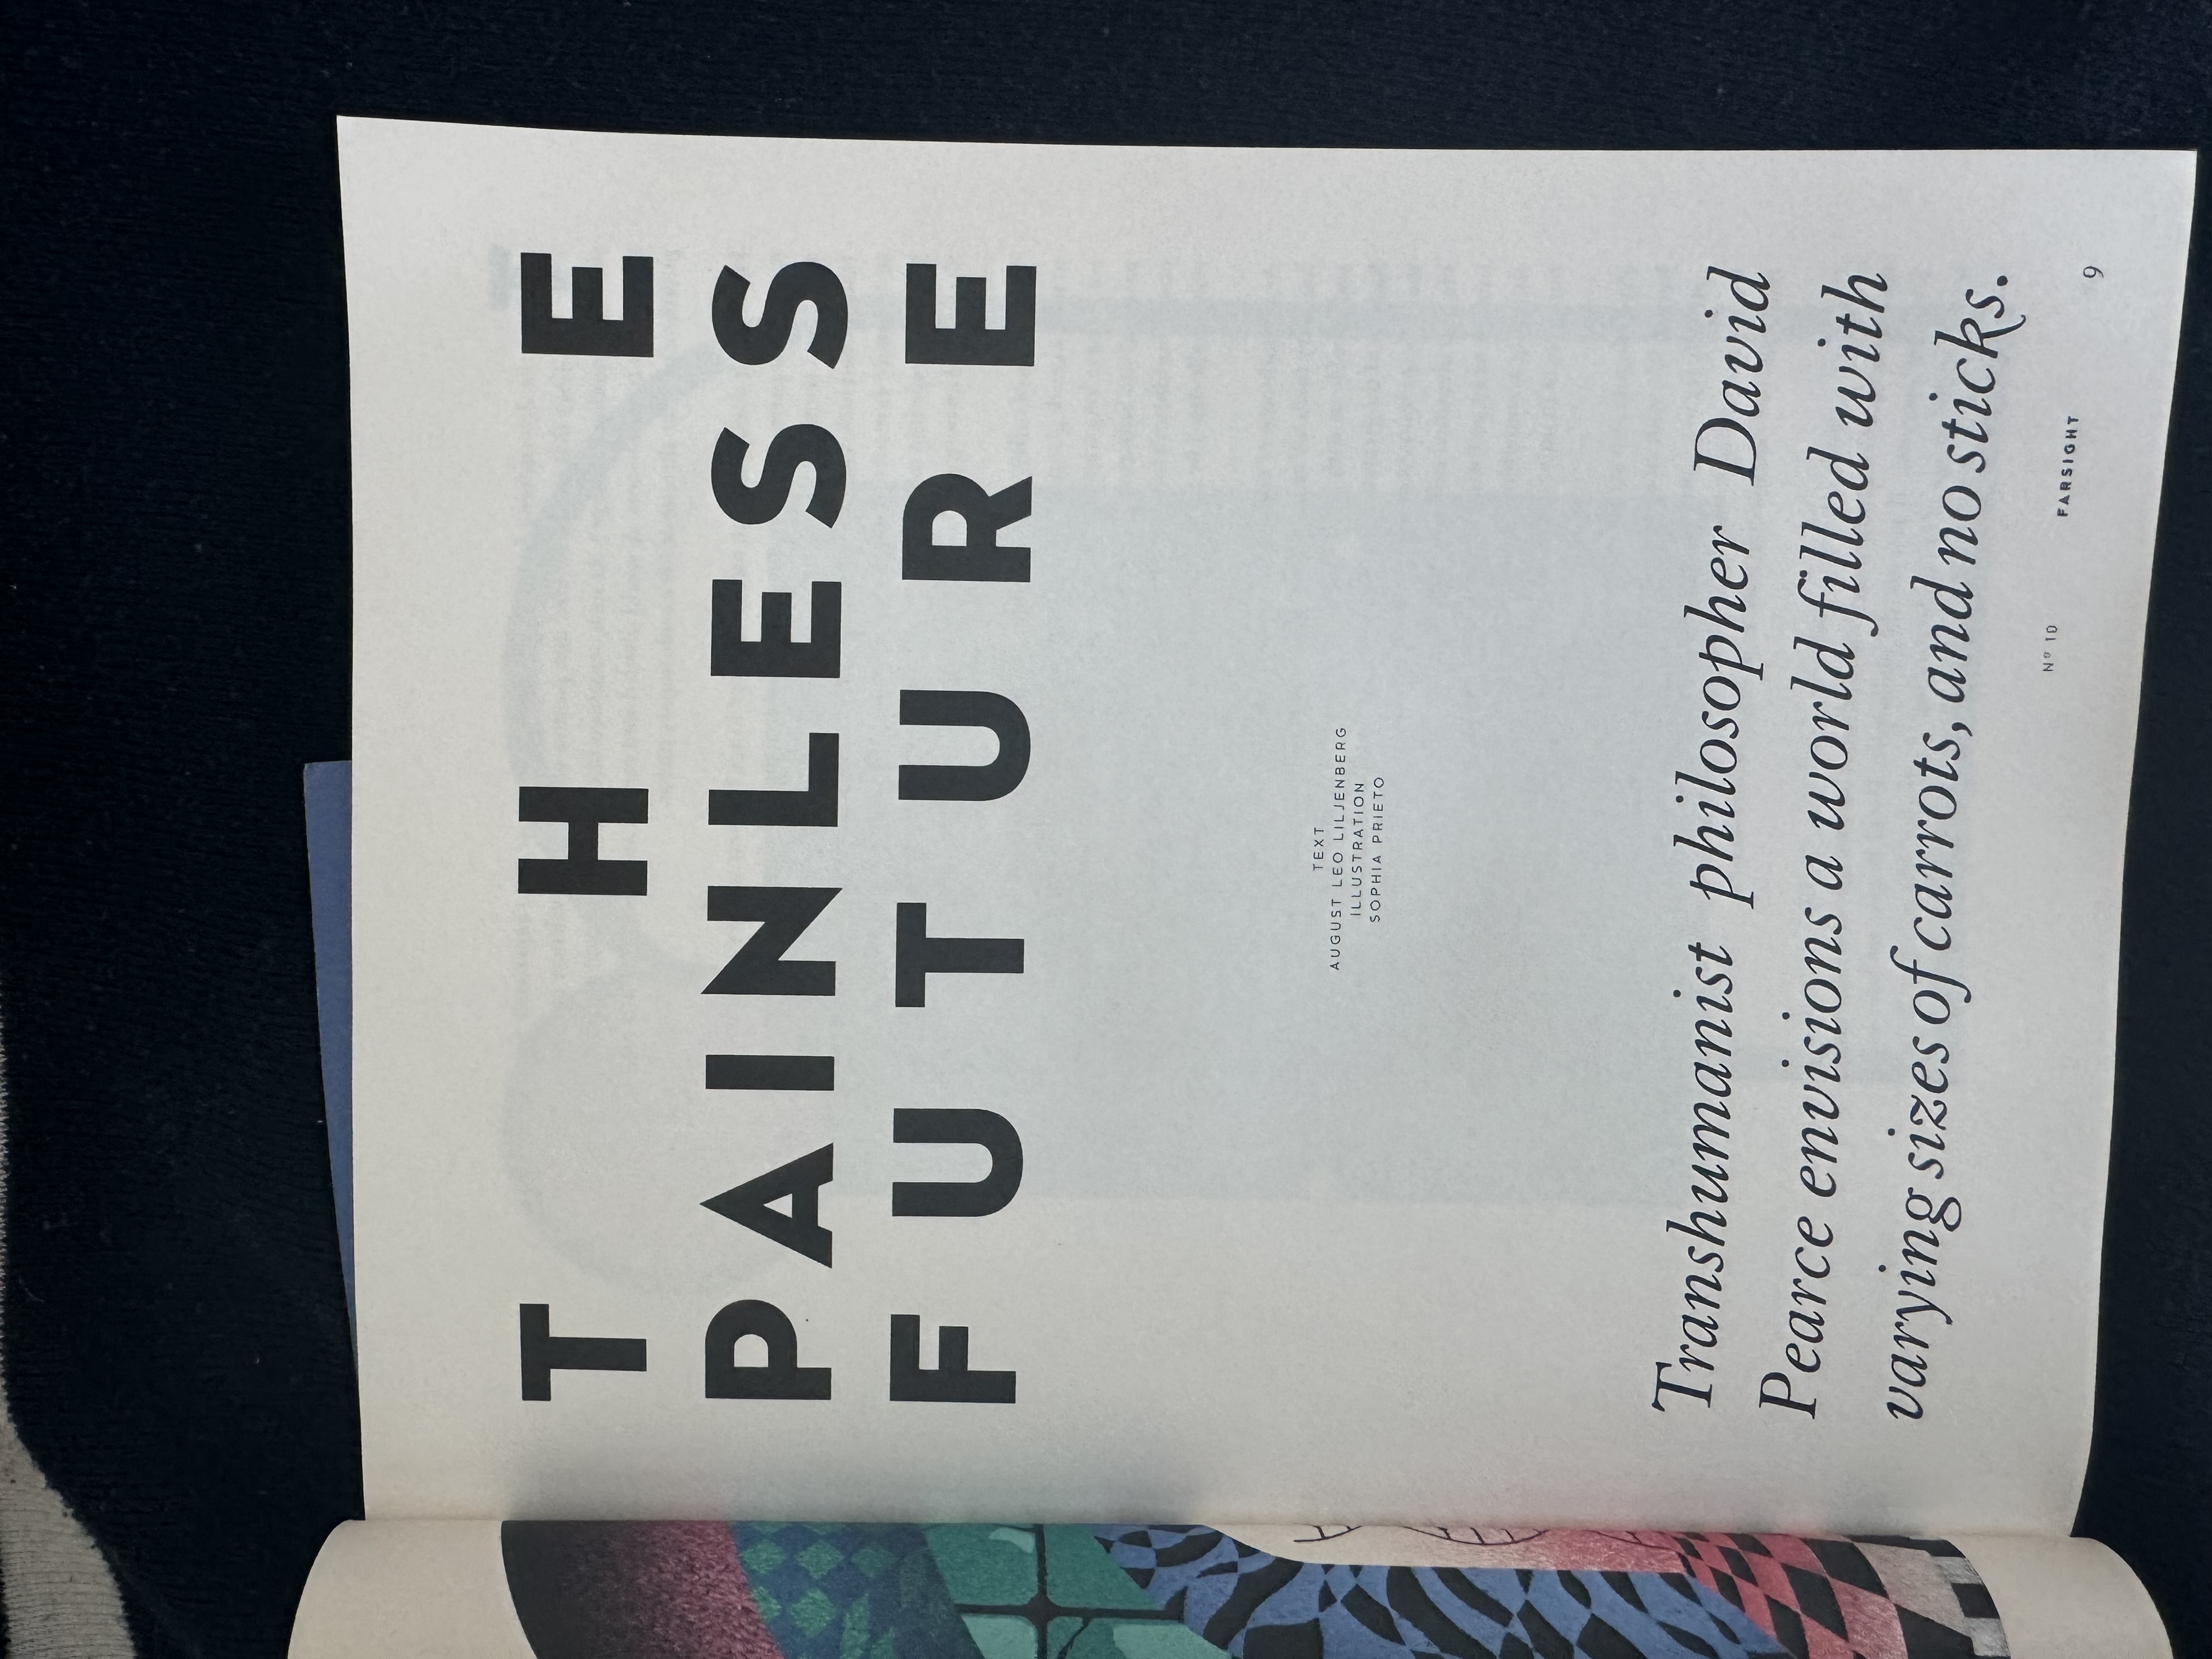 The Painless Future: David Pearce interviewed by FARSIGHT magazine